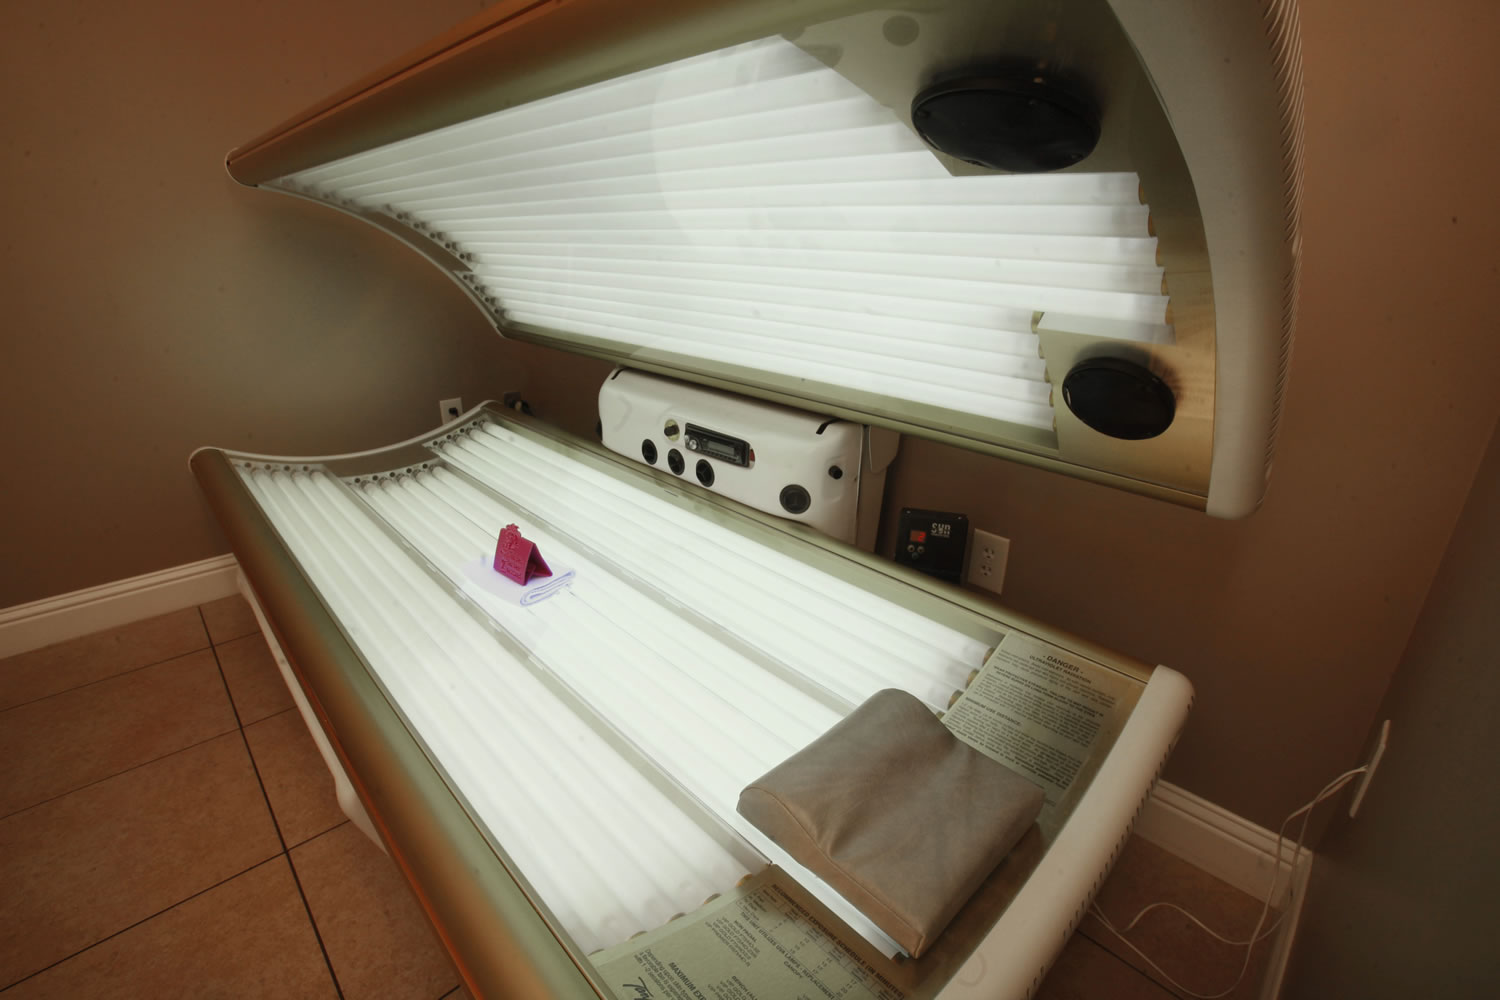 The FDA announced Monday that it wants all tanning beds to carry language warning people under the age of 18 about the risks of indoor tanning.